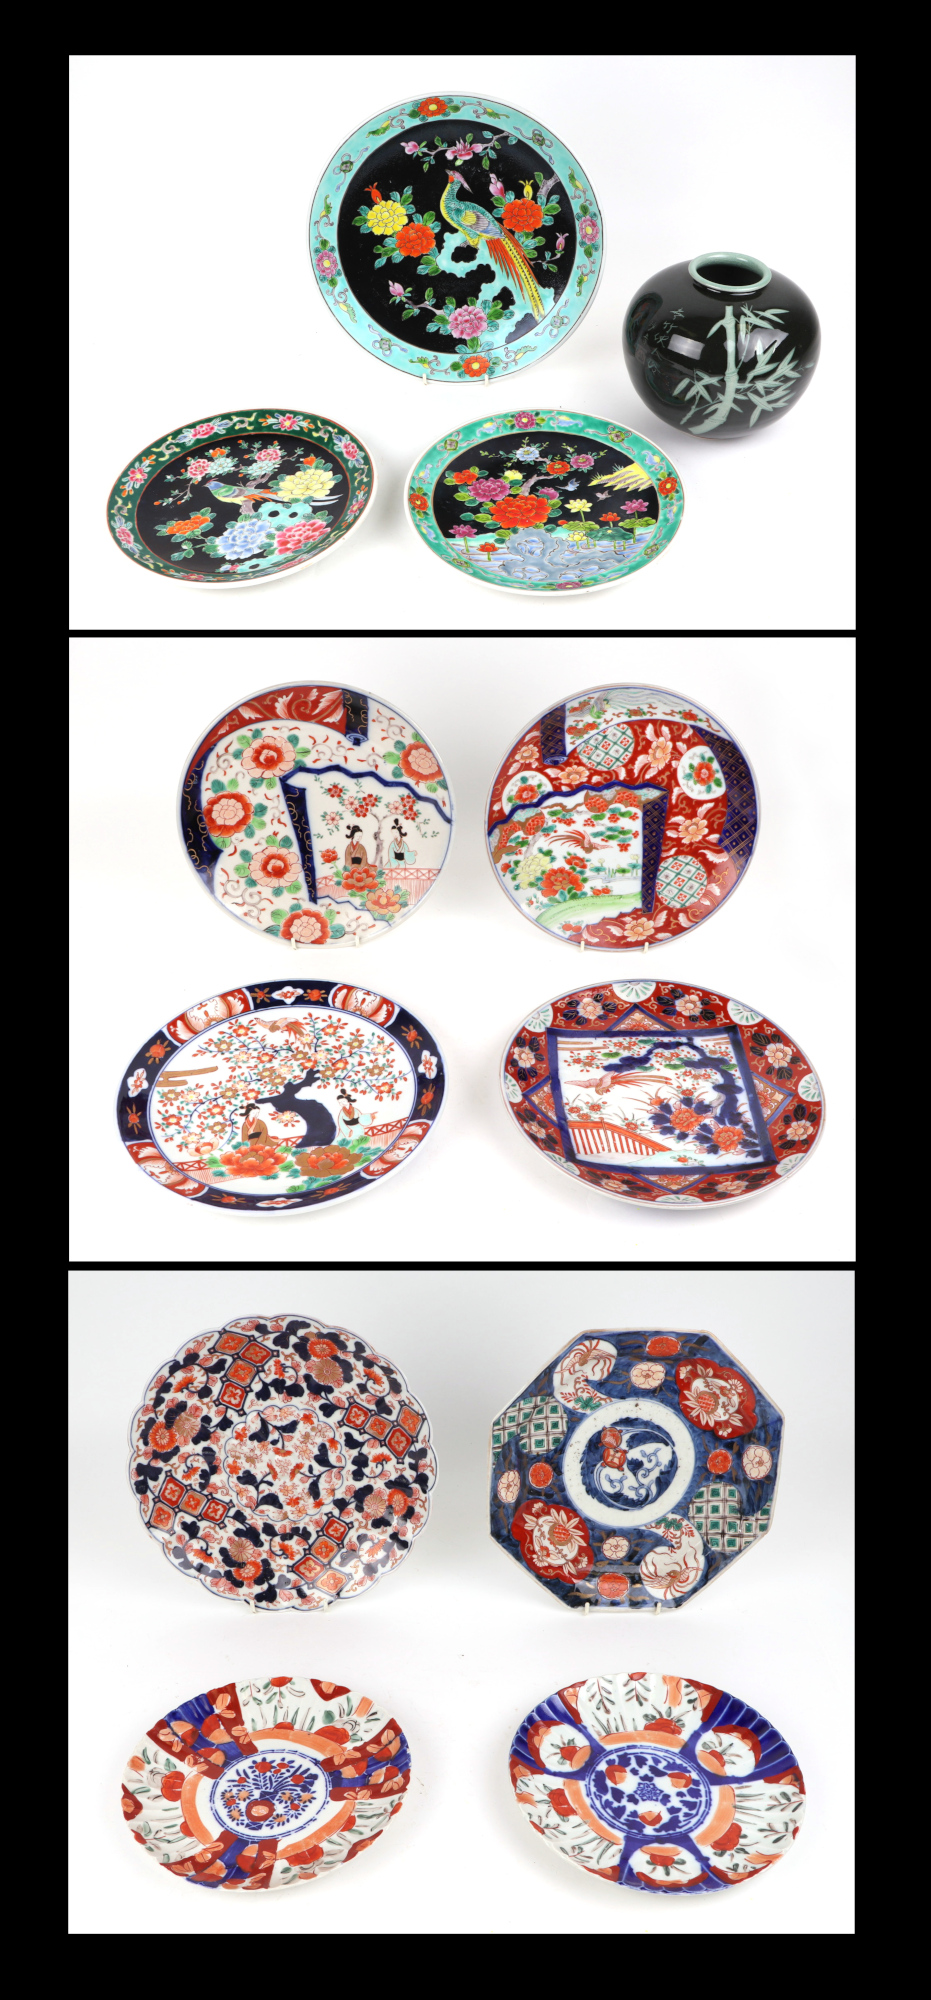 A group of Japanese Imari plates, largest 28cm diameter, a pair of Chinese plates, decorated birds